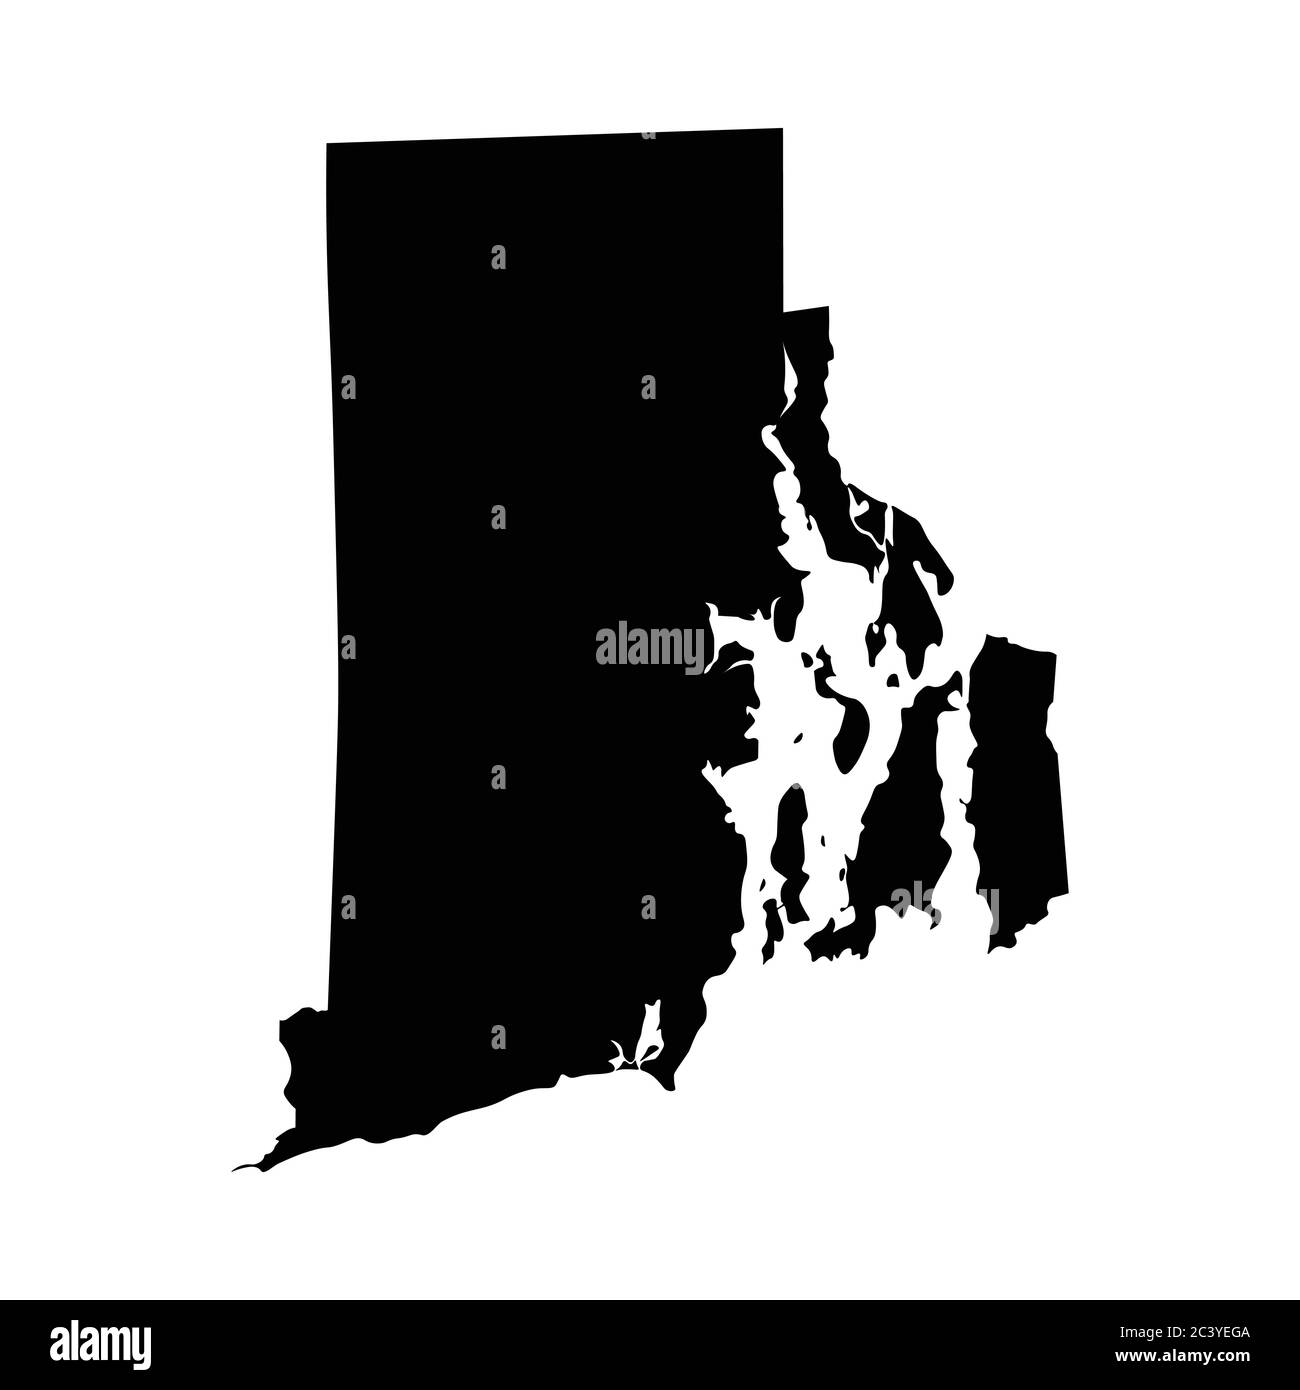 Rhode Island RI state Maps. Black silhouette solid map isolated on a white background. EPS Vector Stock Vector